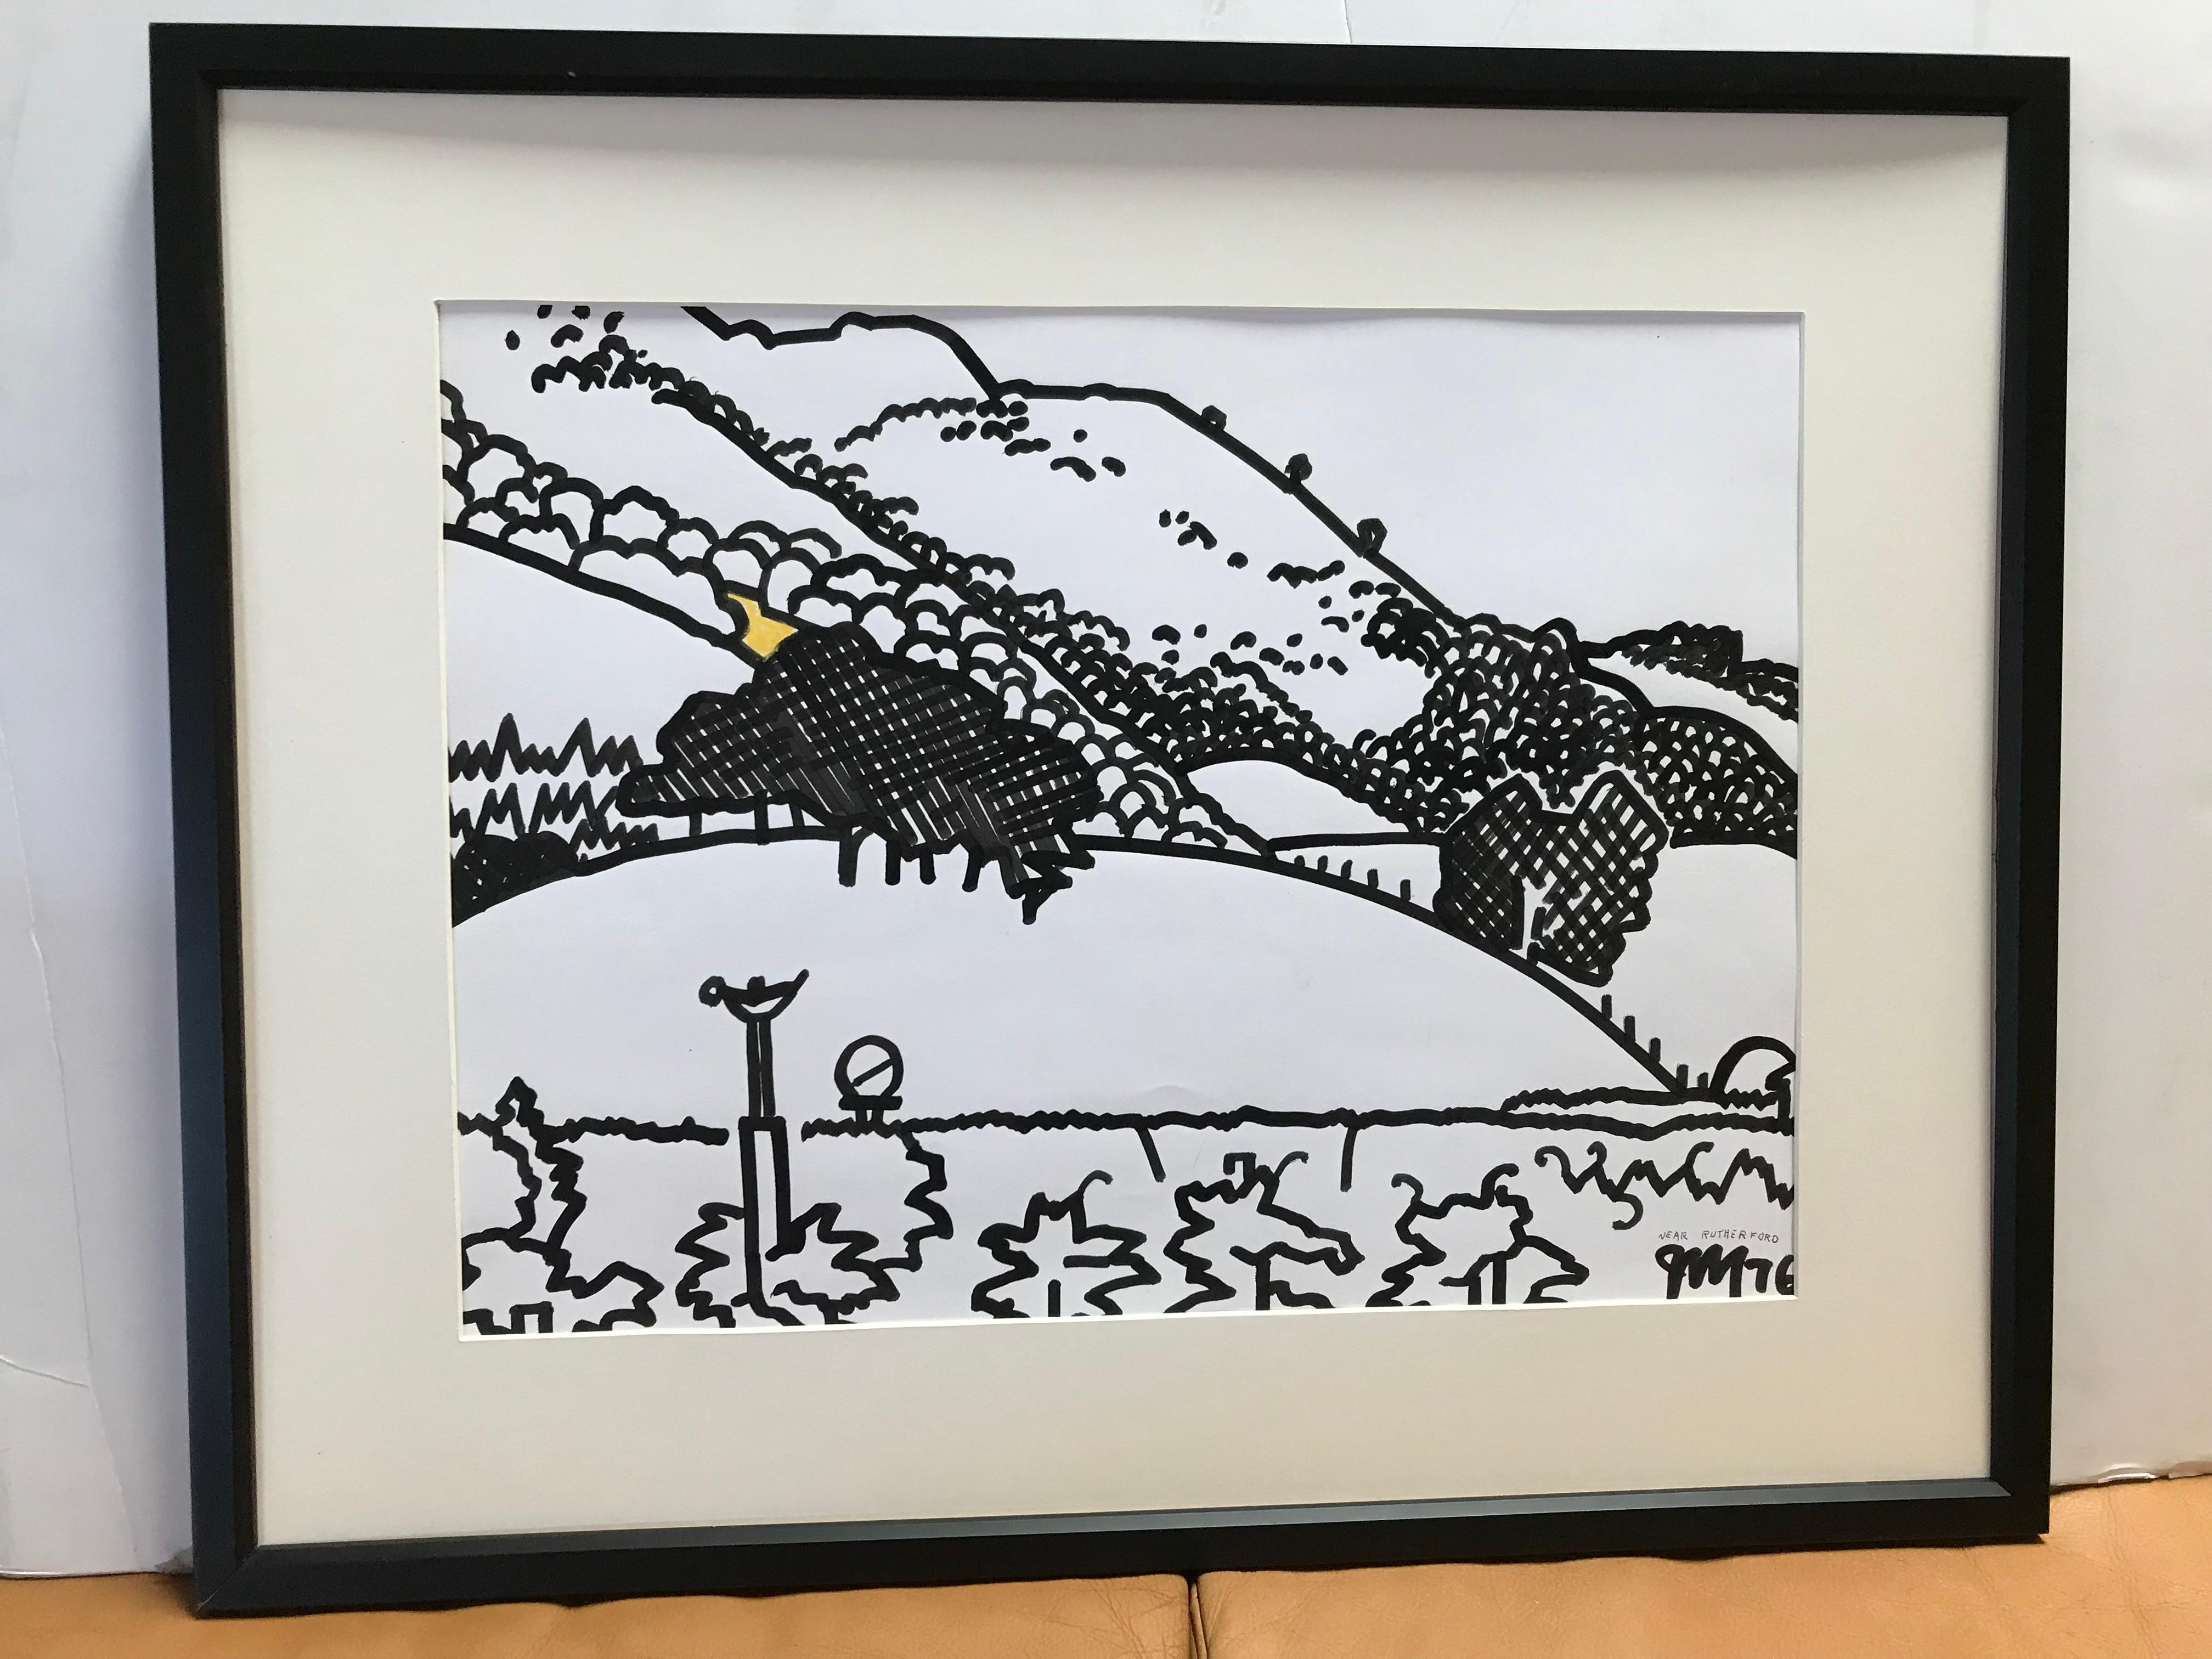 Framed black and white landscape watercolor by James McCray (1912-1993), signed by the artist and dated 1976.
McCray taught at the California School of Fine Arts in San Francisco during the 1940's. He had solo and group exhibitions from 1935-1966.